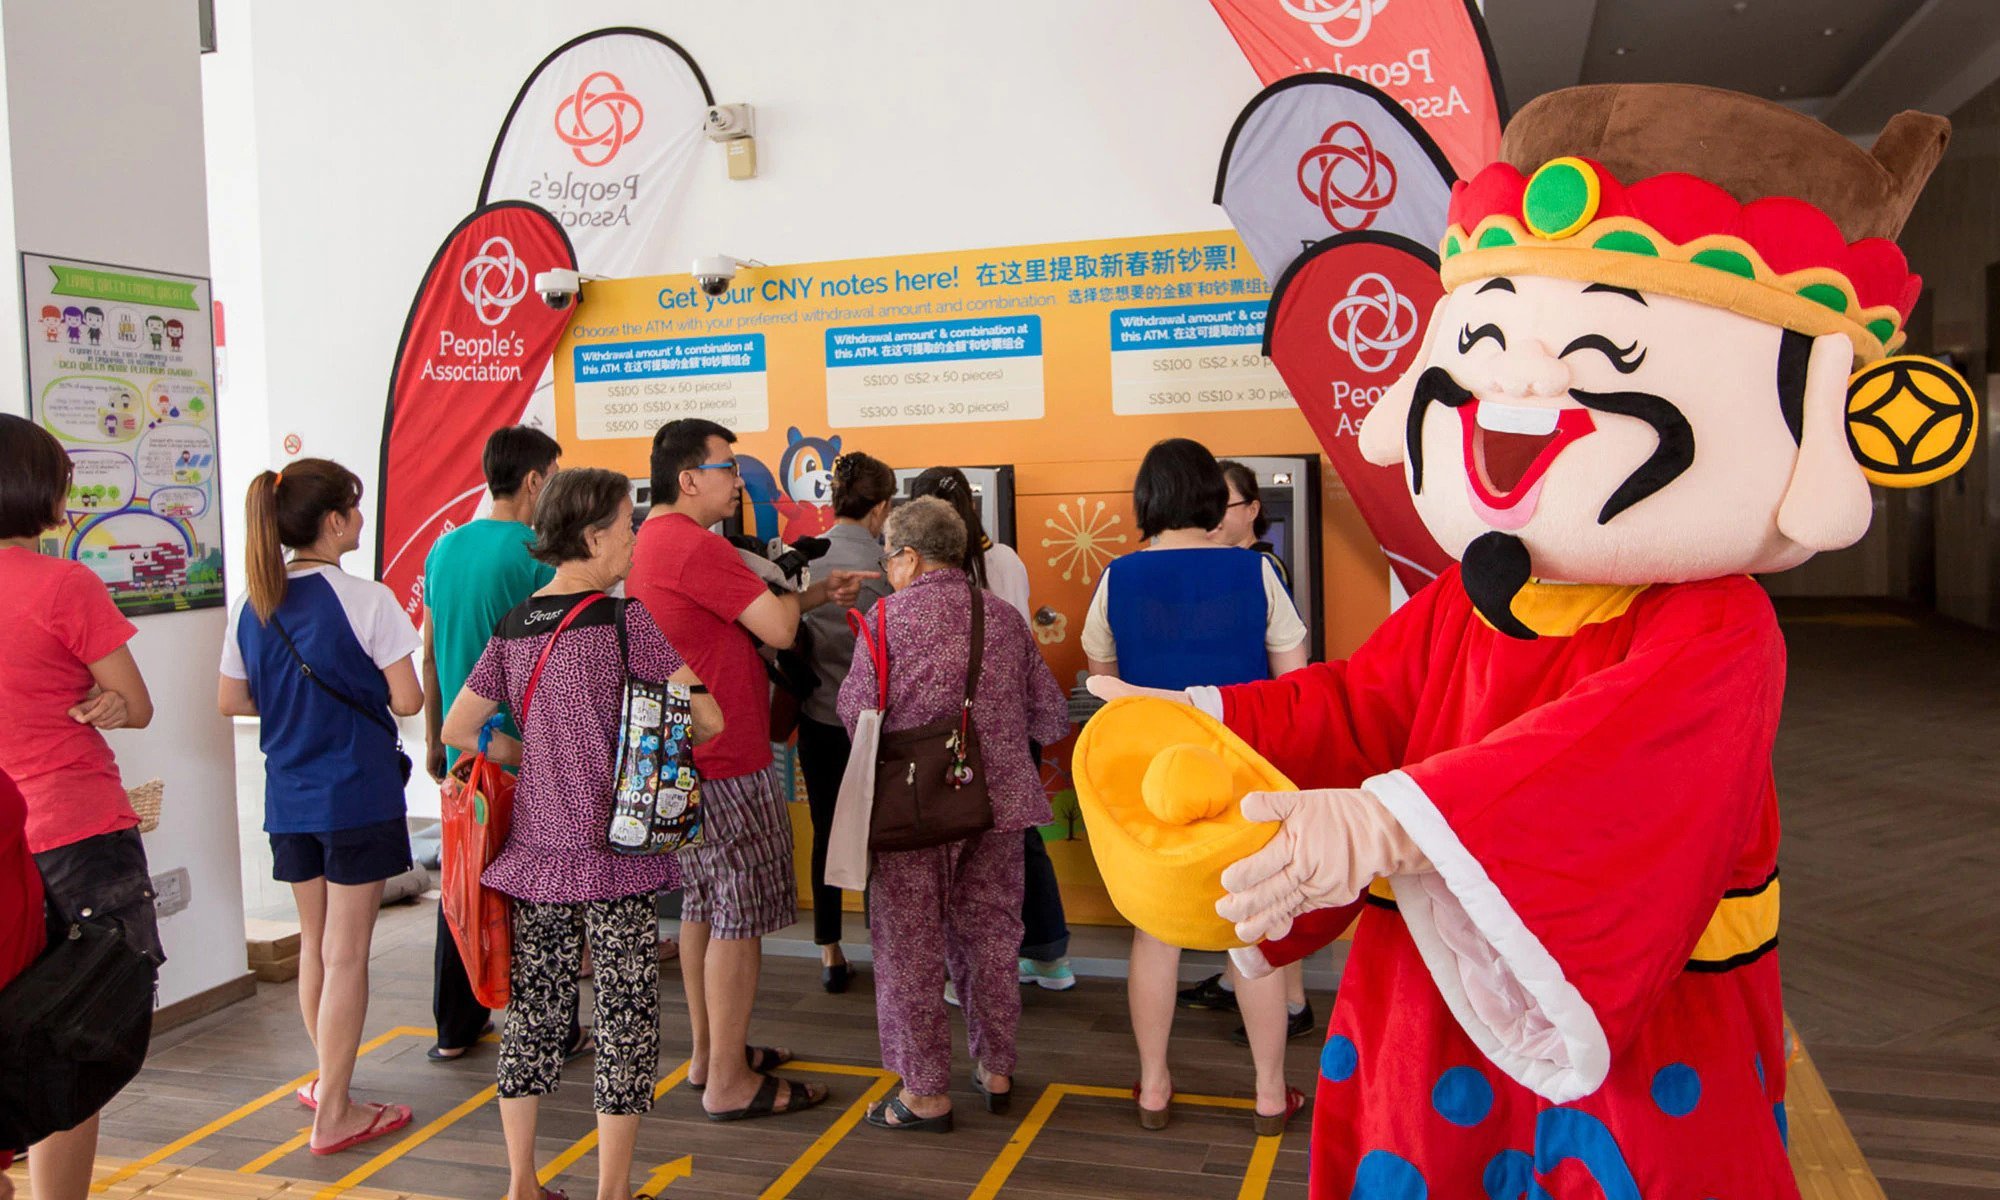 S’poreans Encouraged To Give E-Ang Paos For CNY, MAS Says Will Reduce Queues For Physical Notes